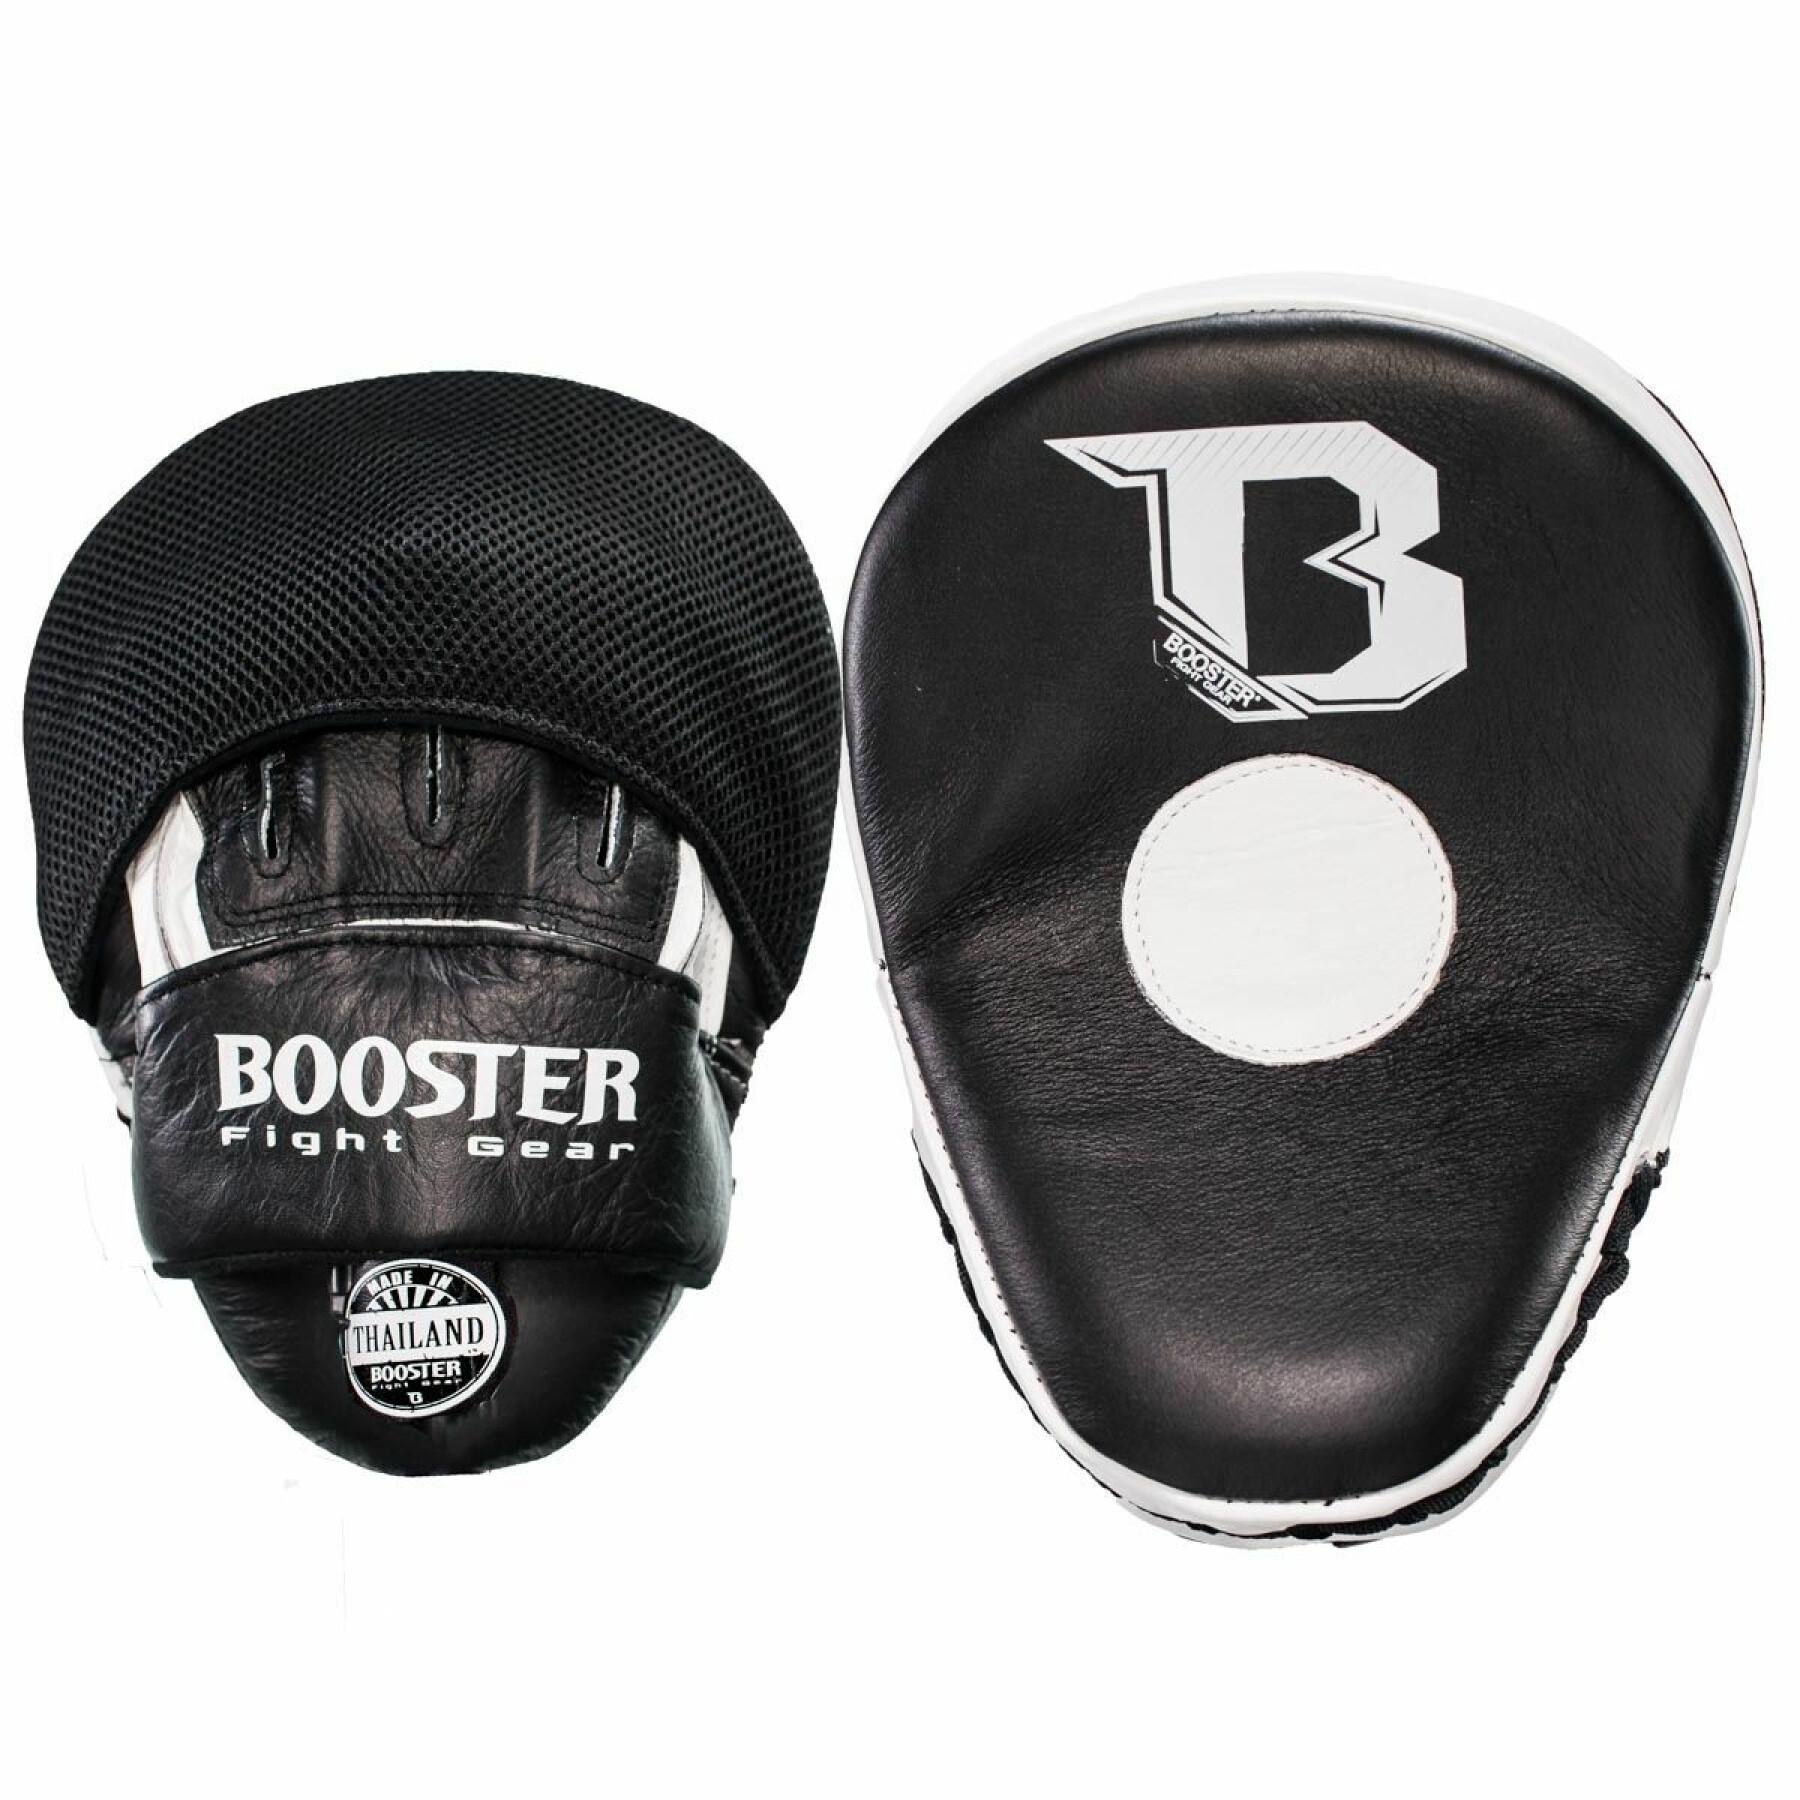 Pattes d'ours Booster Fight Gear Bpm 1